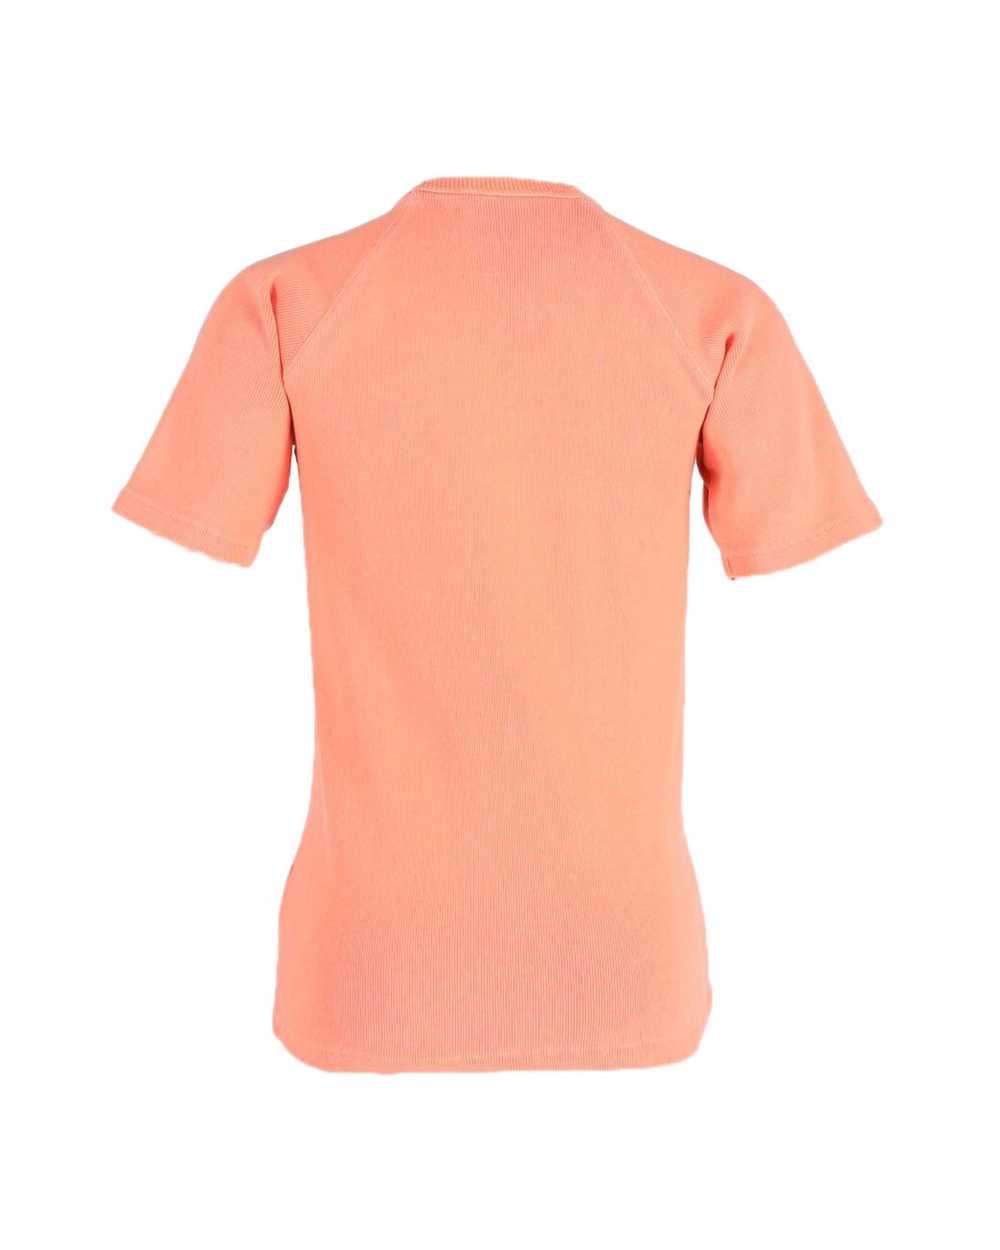 Victoria Beckham Ribbed Knit T-shirt in Coral Ora… - image 2